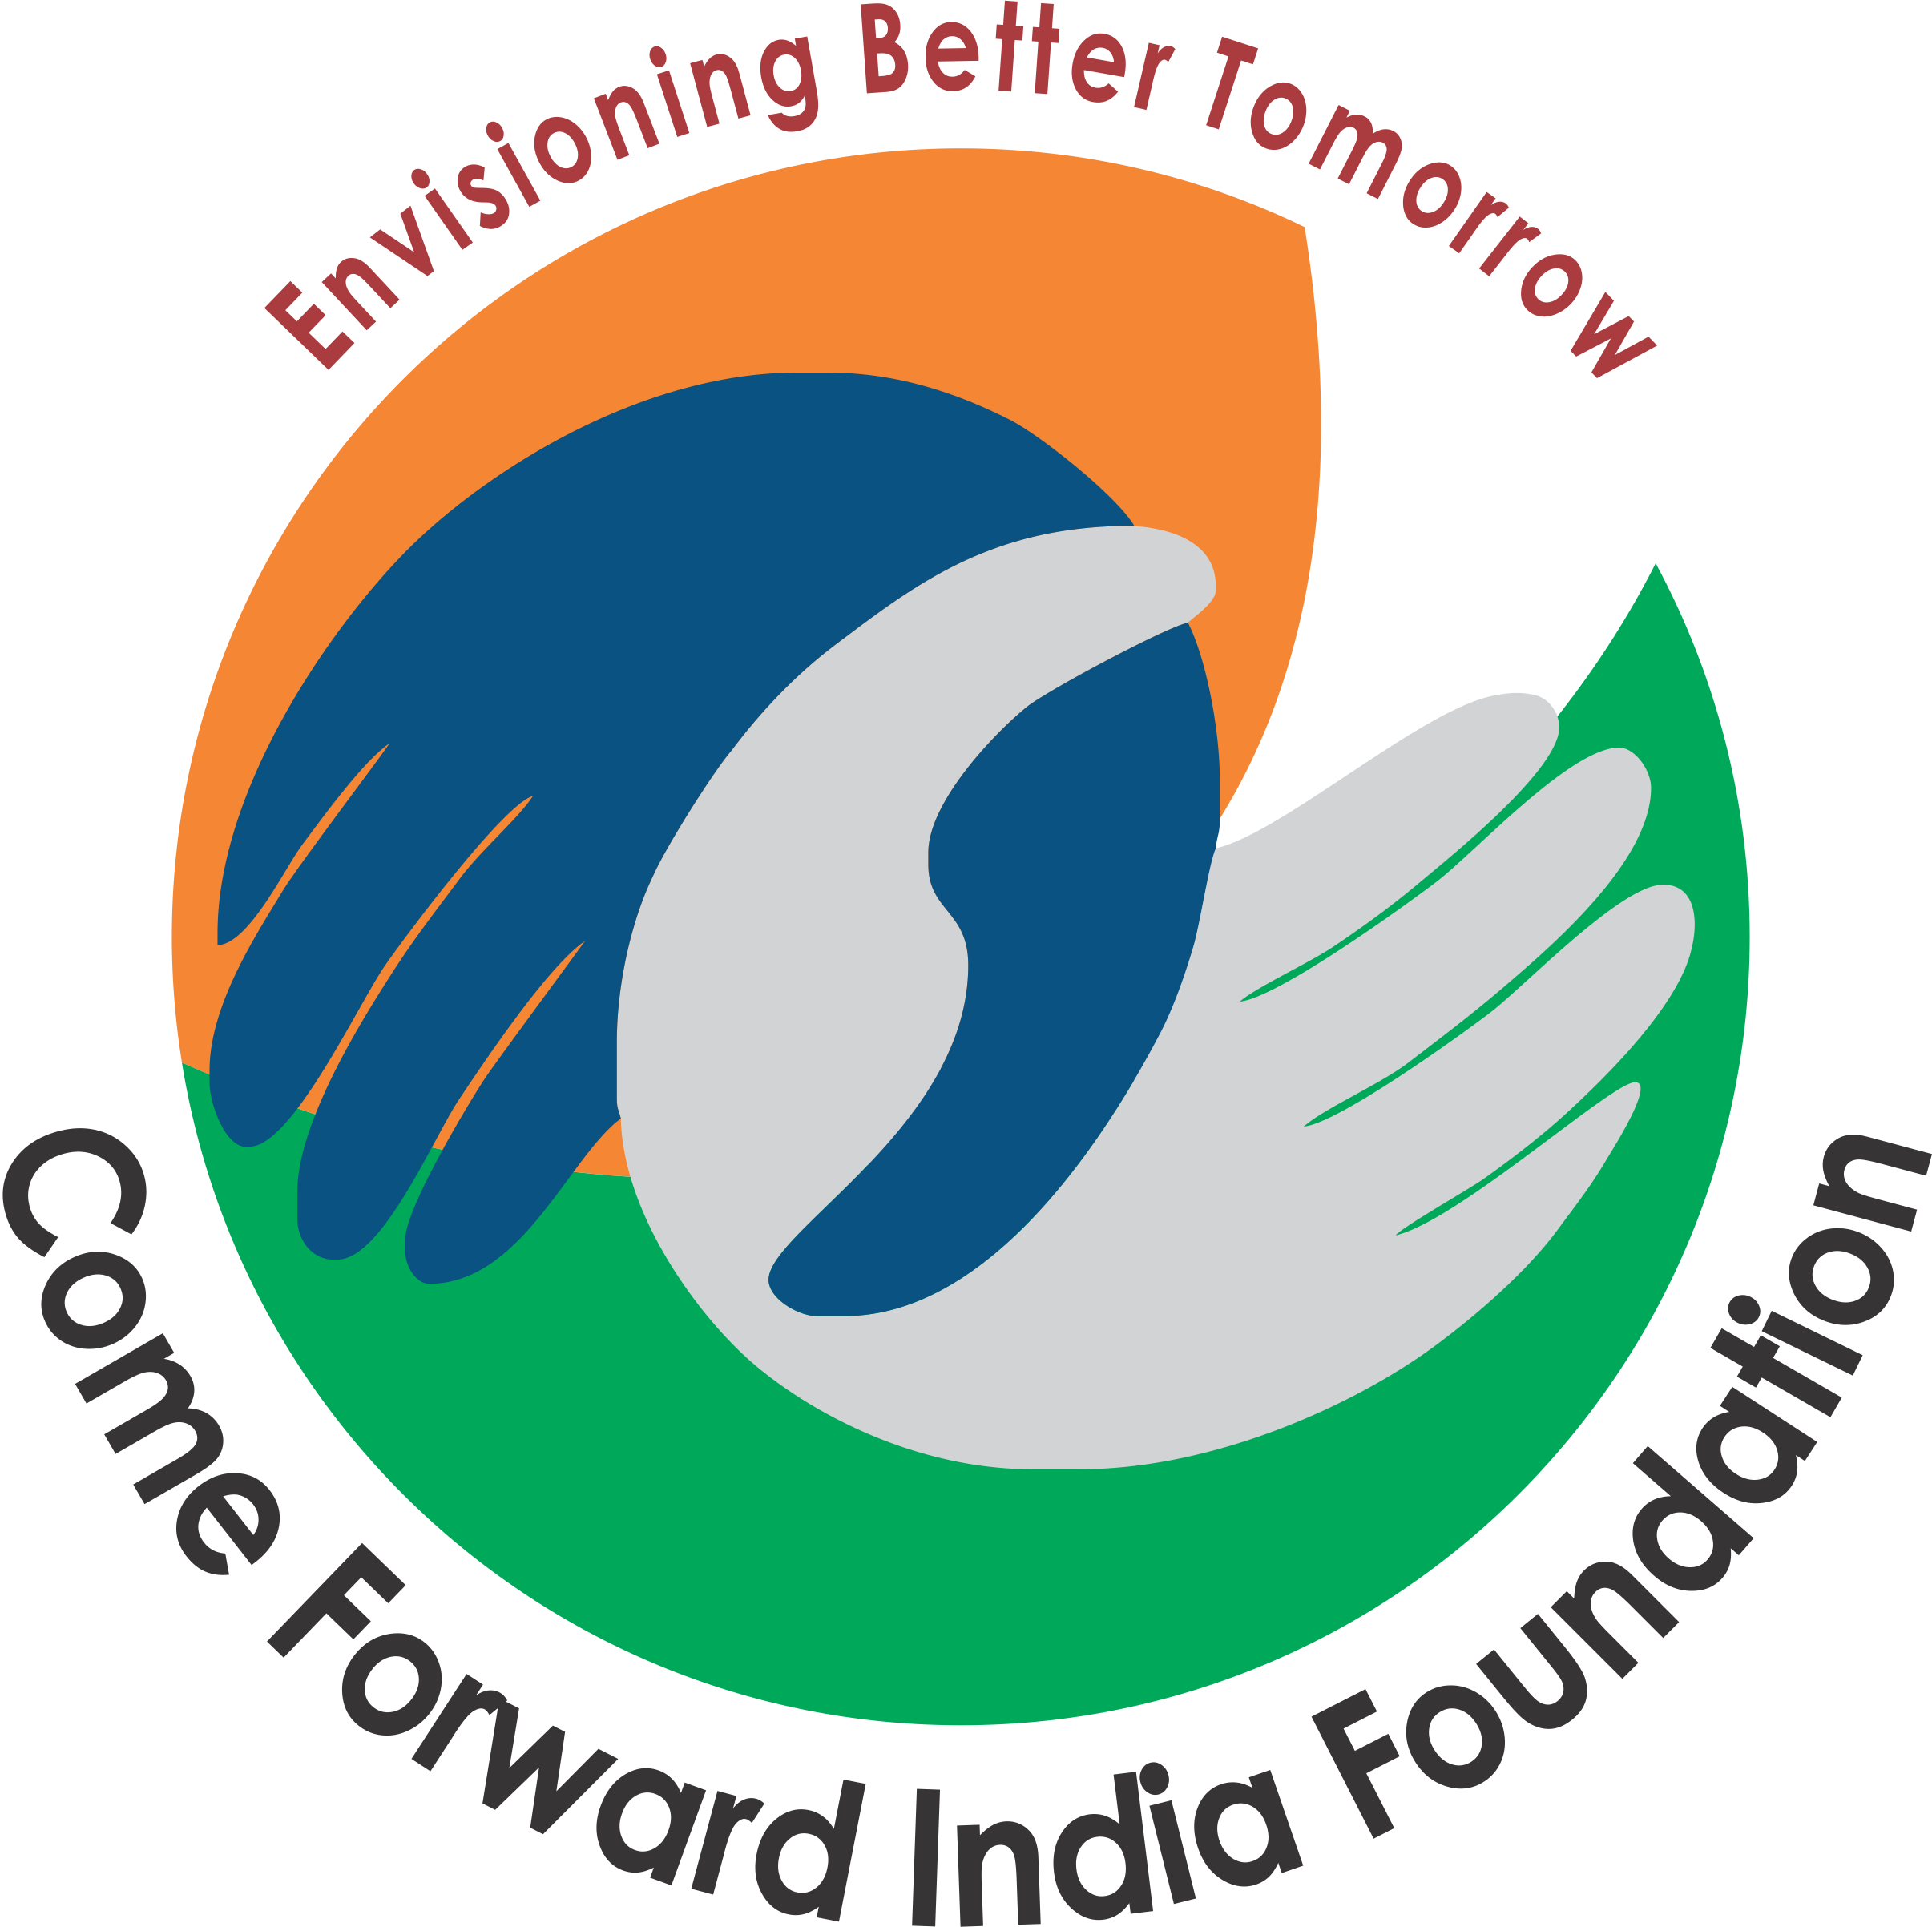 Welcome to Come Forward India Foundation | Envisioning Better Tomorrow